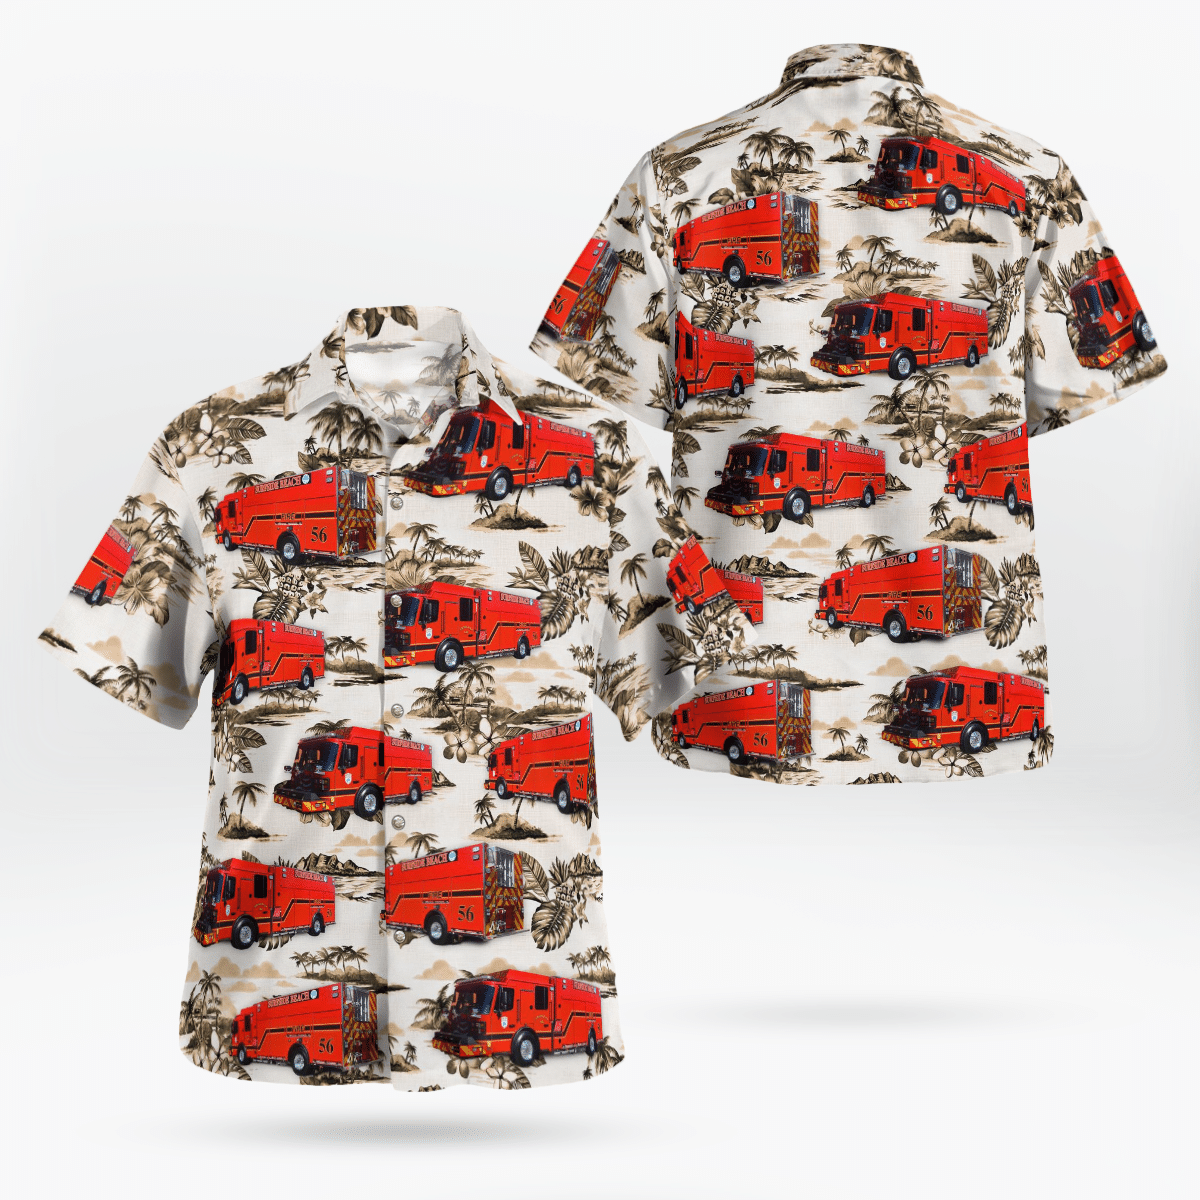 Consider getting these Hawaiian Shirt for your friends 201